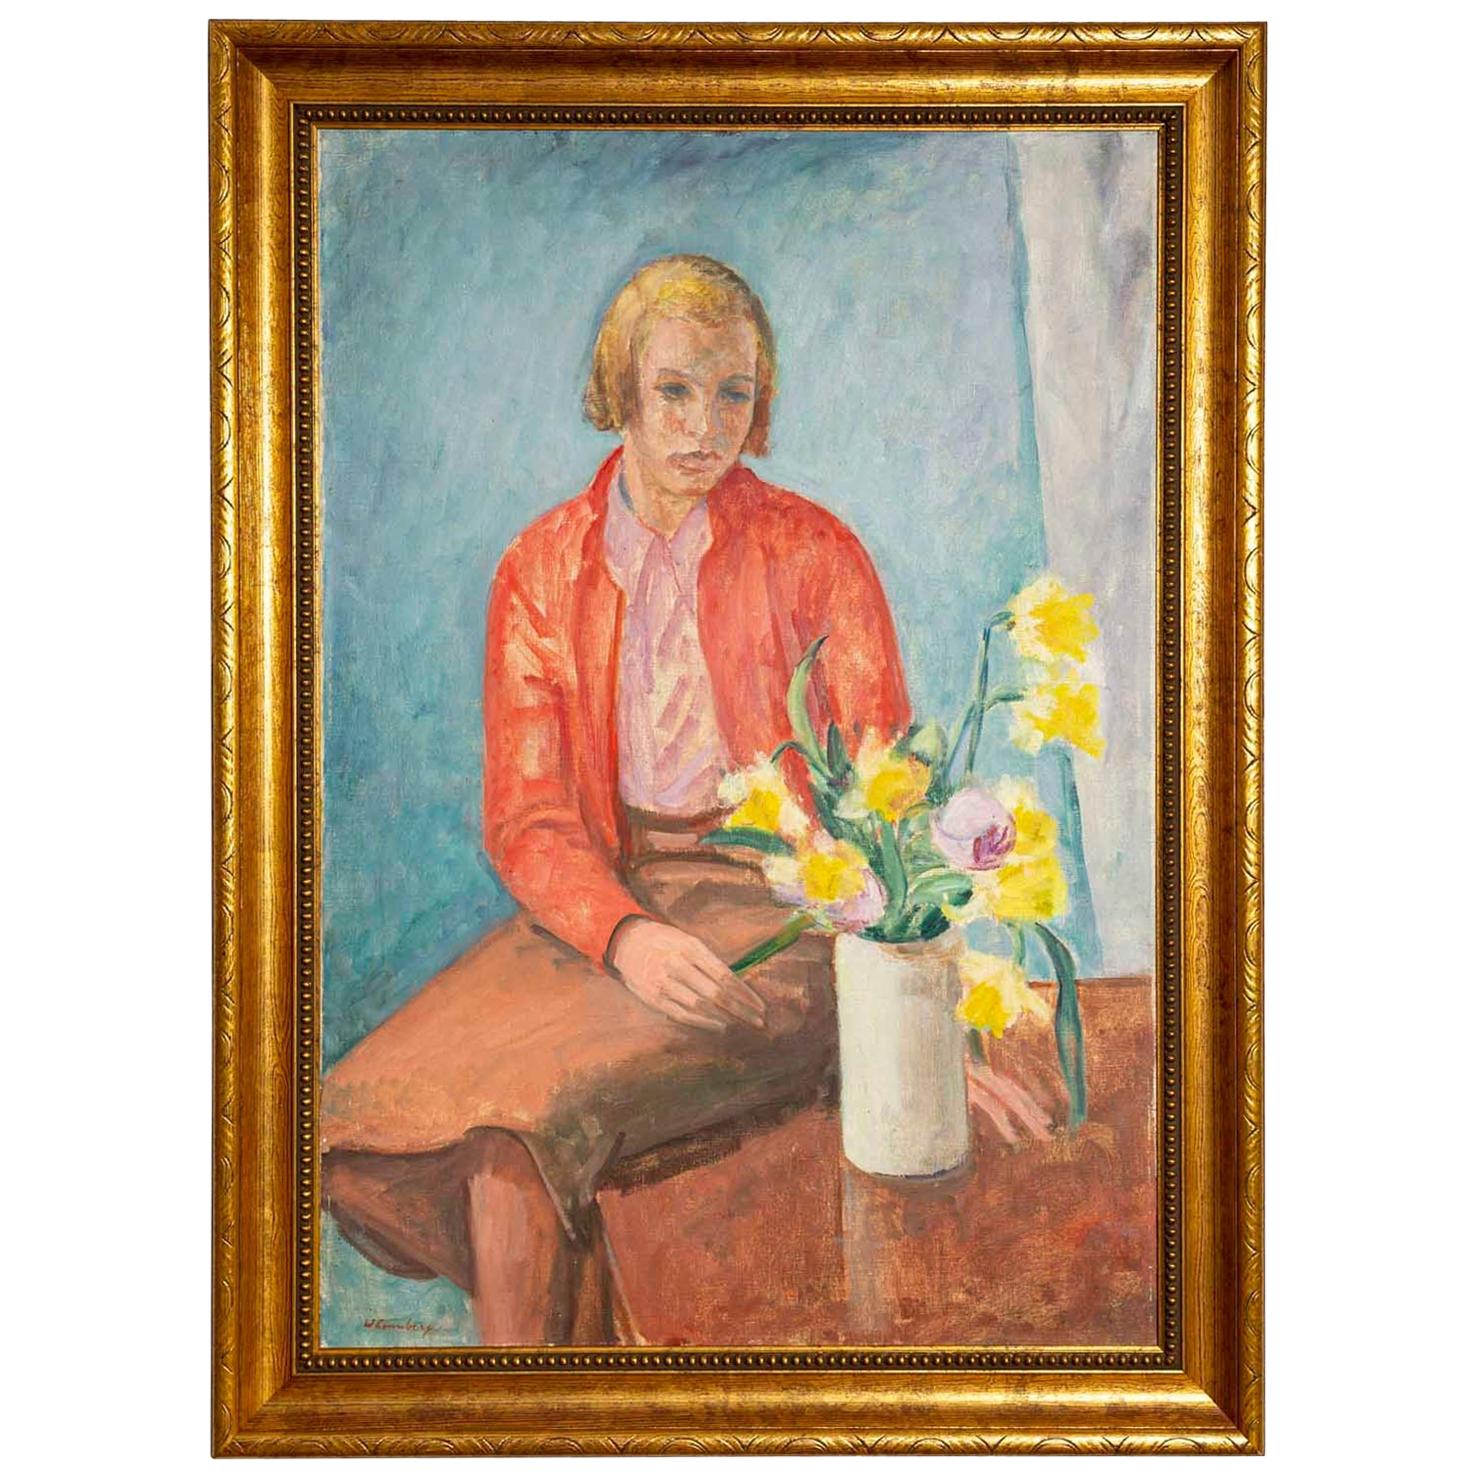 1940s Oil on Canvas Portrait "Girl with Flowers" by William Lonnberg